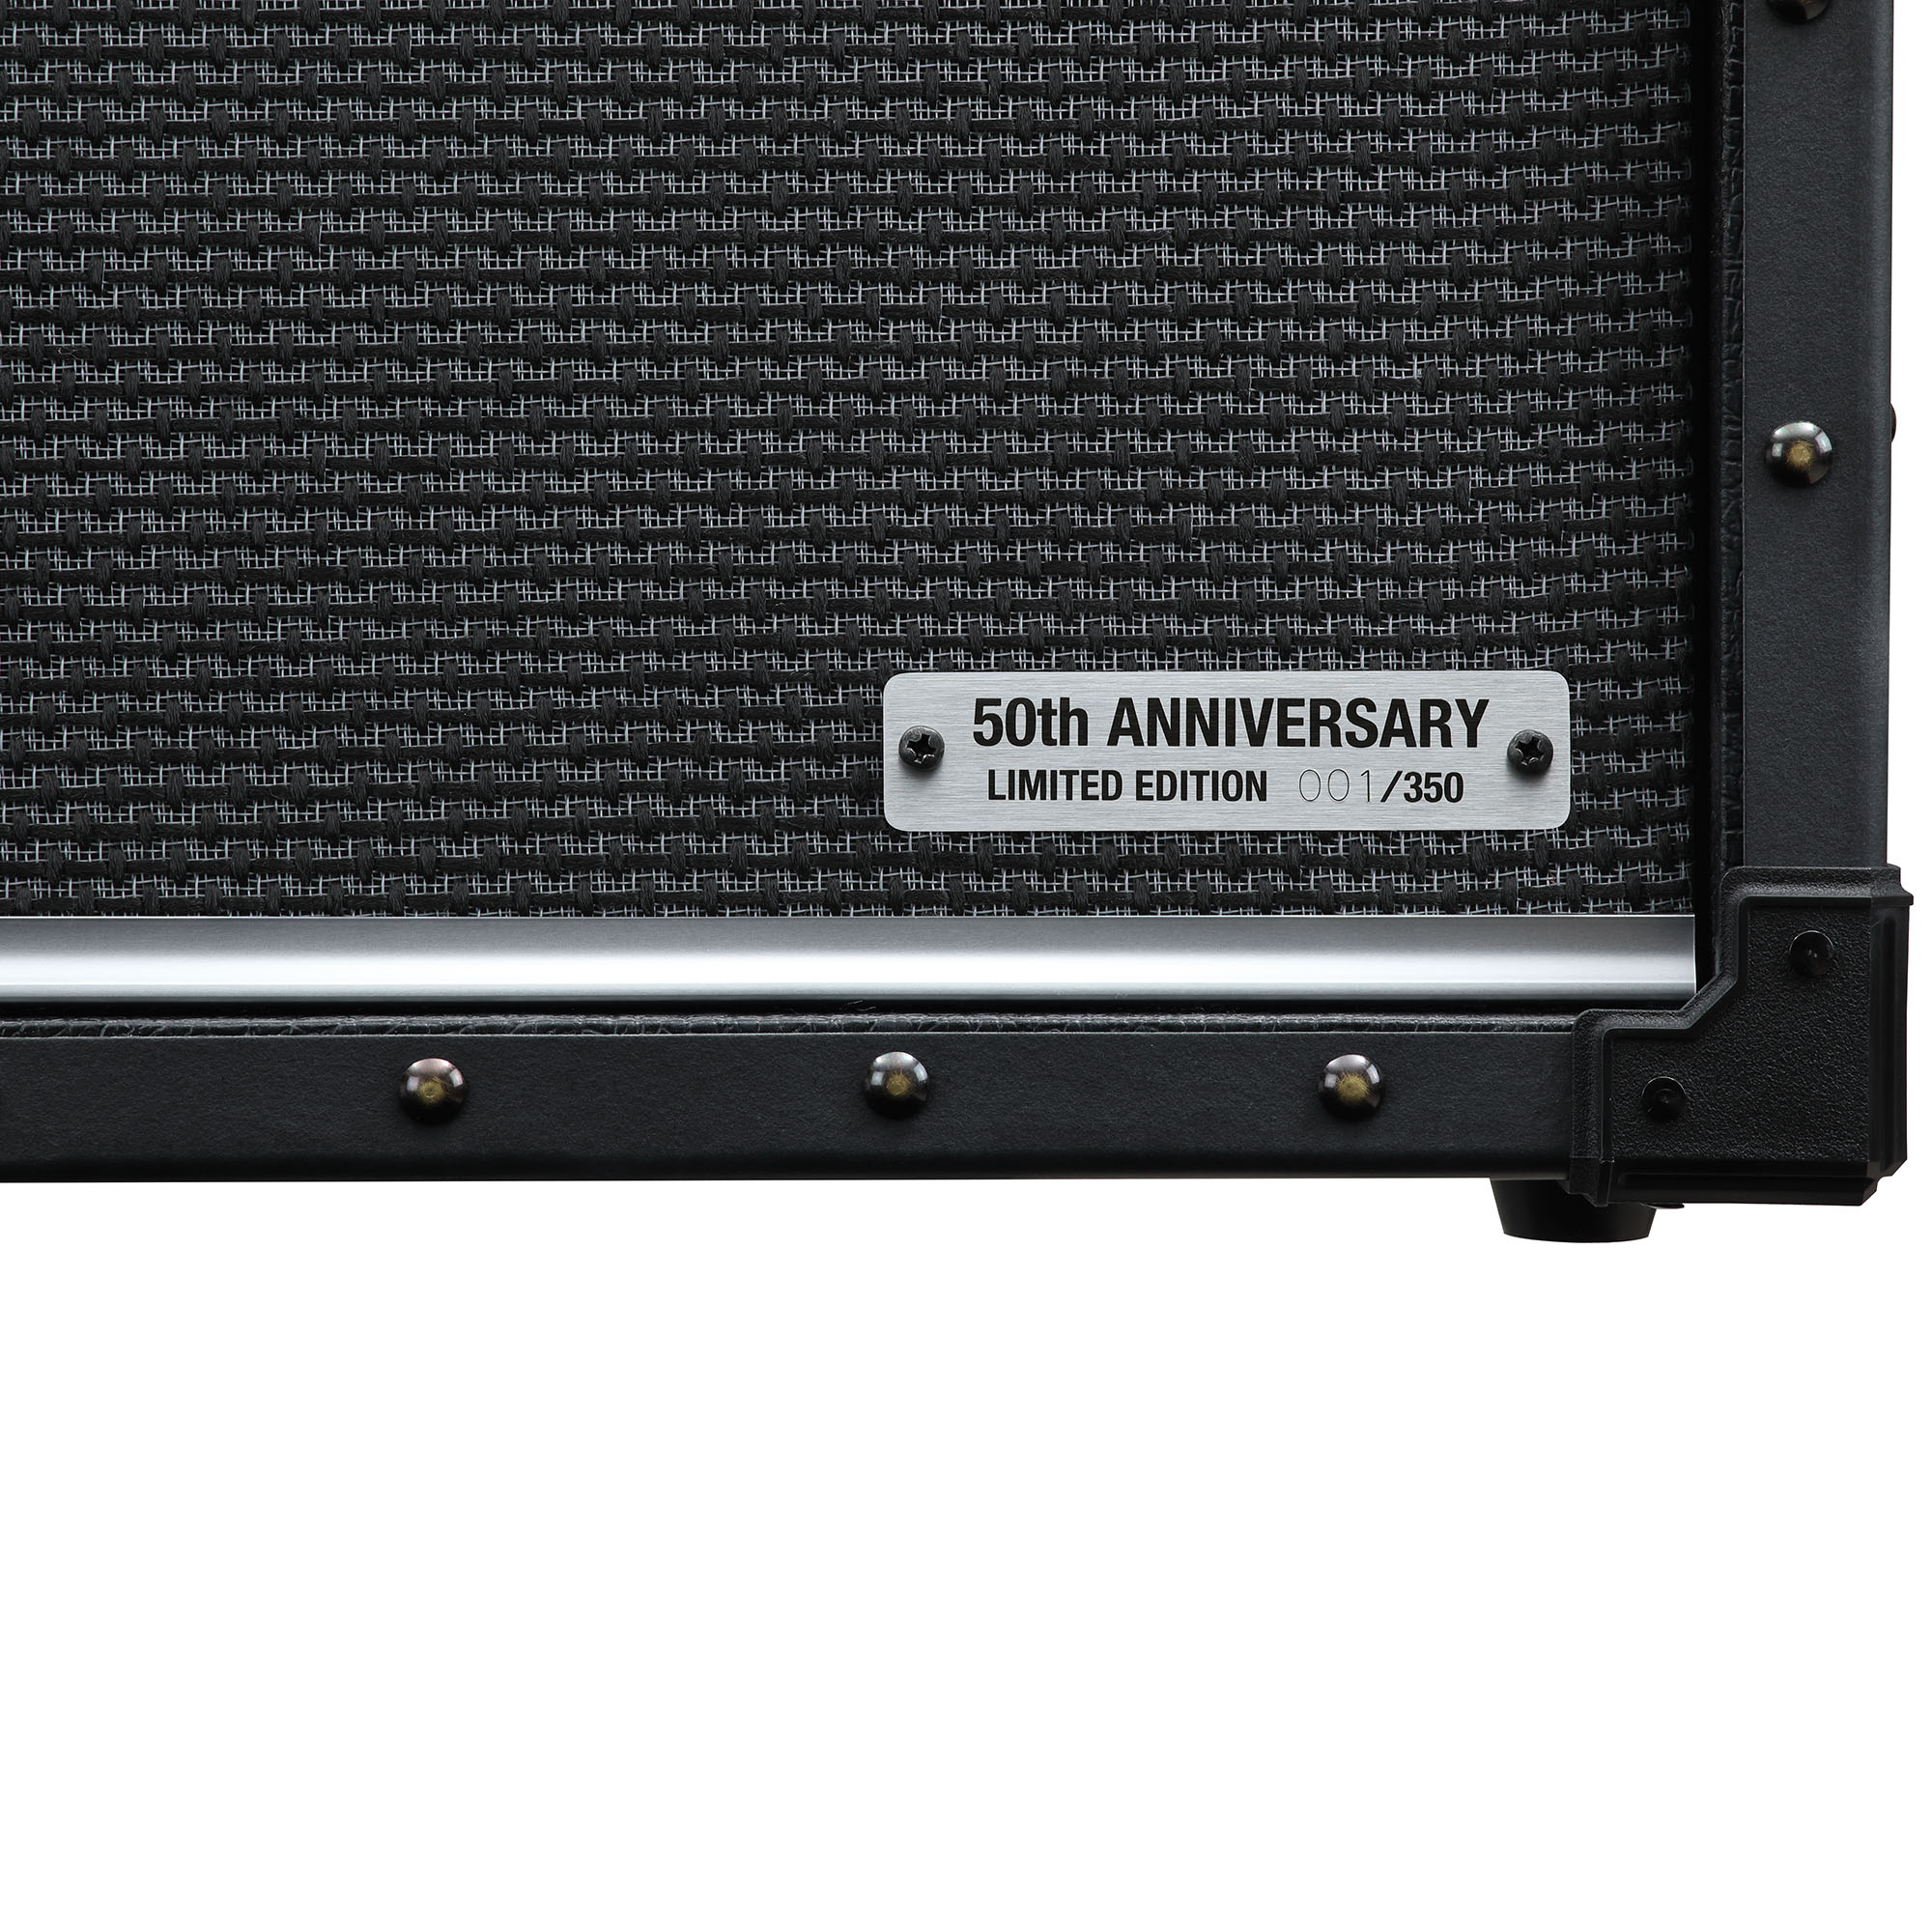 Roland Jc-120 Jazz Chorus Limited Edition 120w 2x12 - Electric guitar combo amp - Variation 4